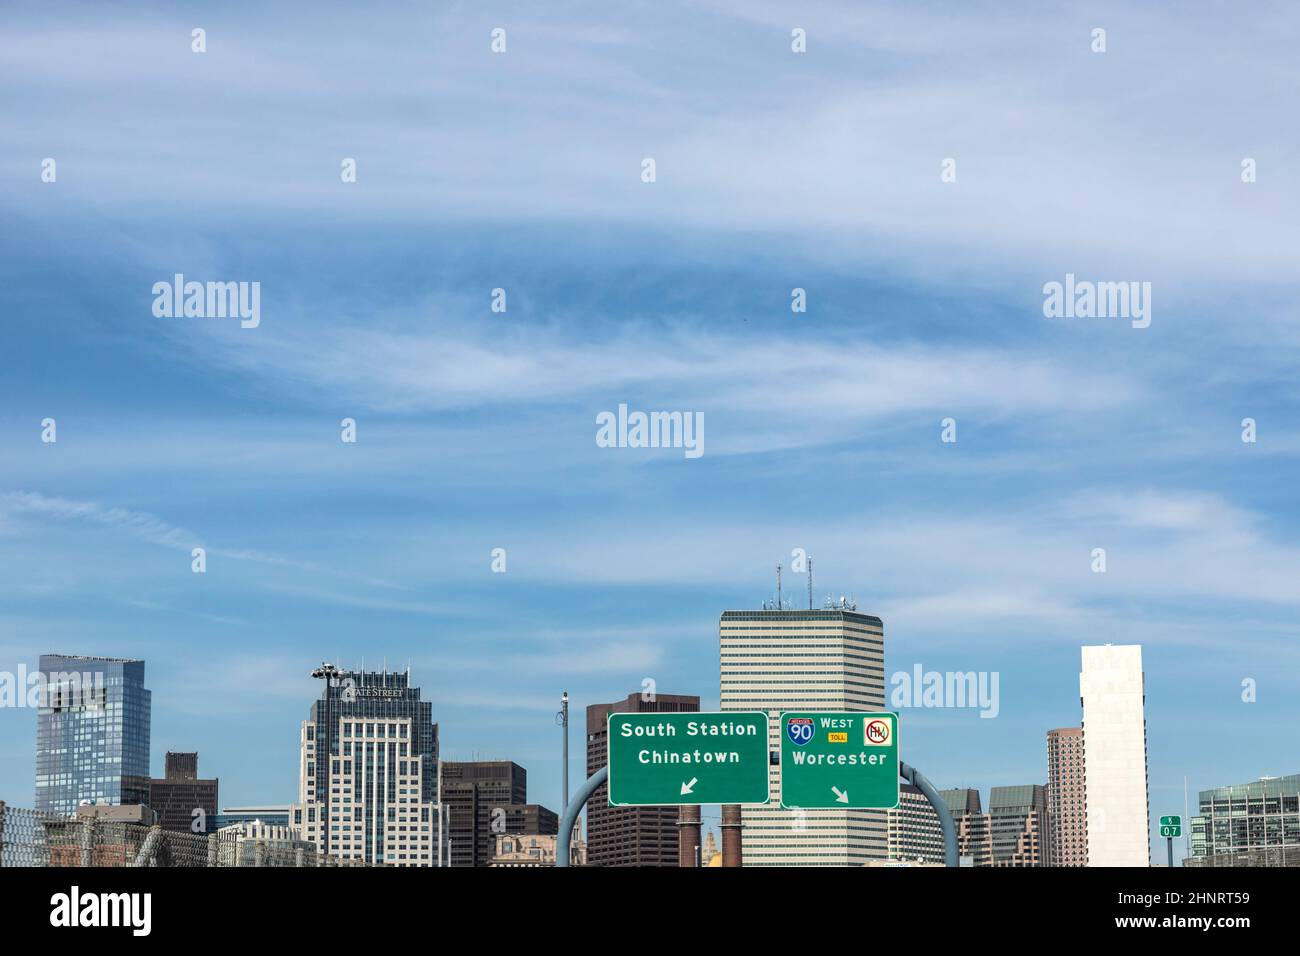 enter the capital of Massachusetts, Boston by highway. In the background the modern skyline Stock Photo